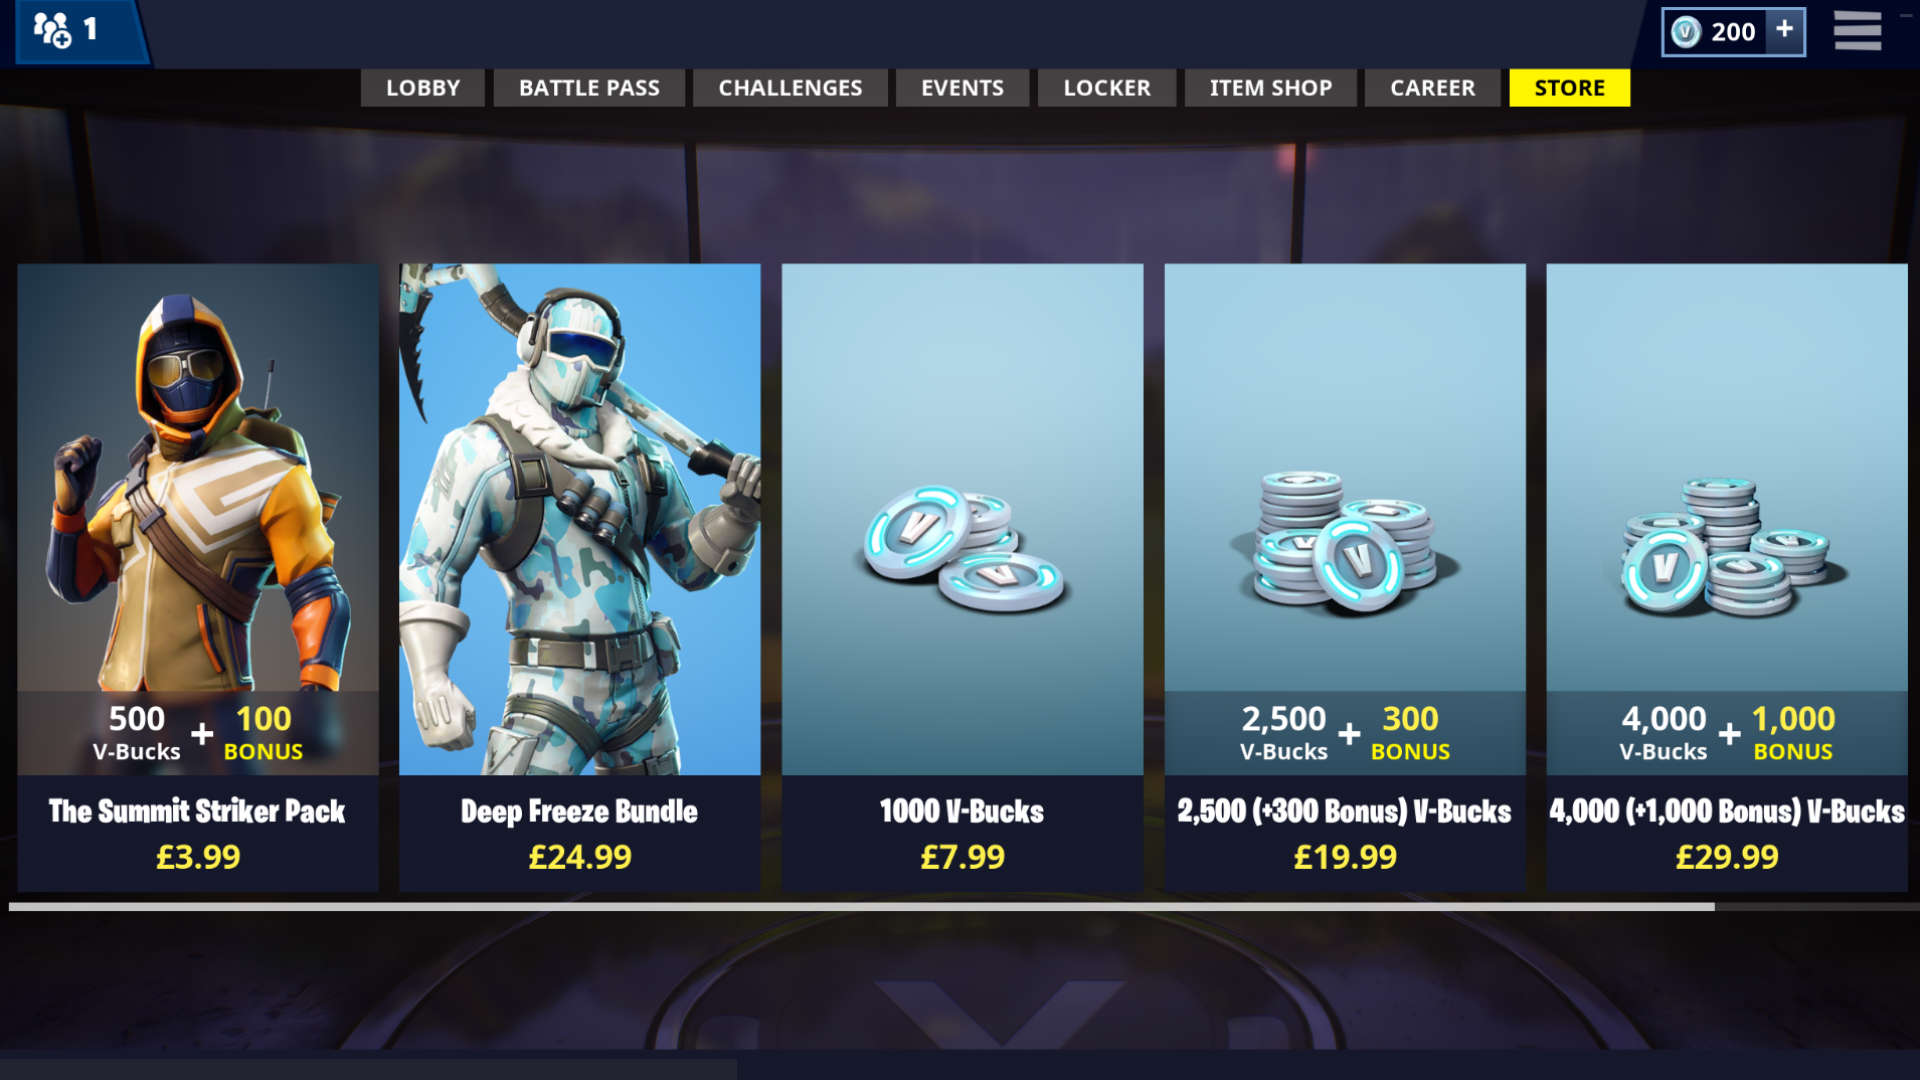 How Many V Bucks Do You Get From Save The World Fortnite - 